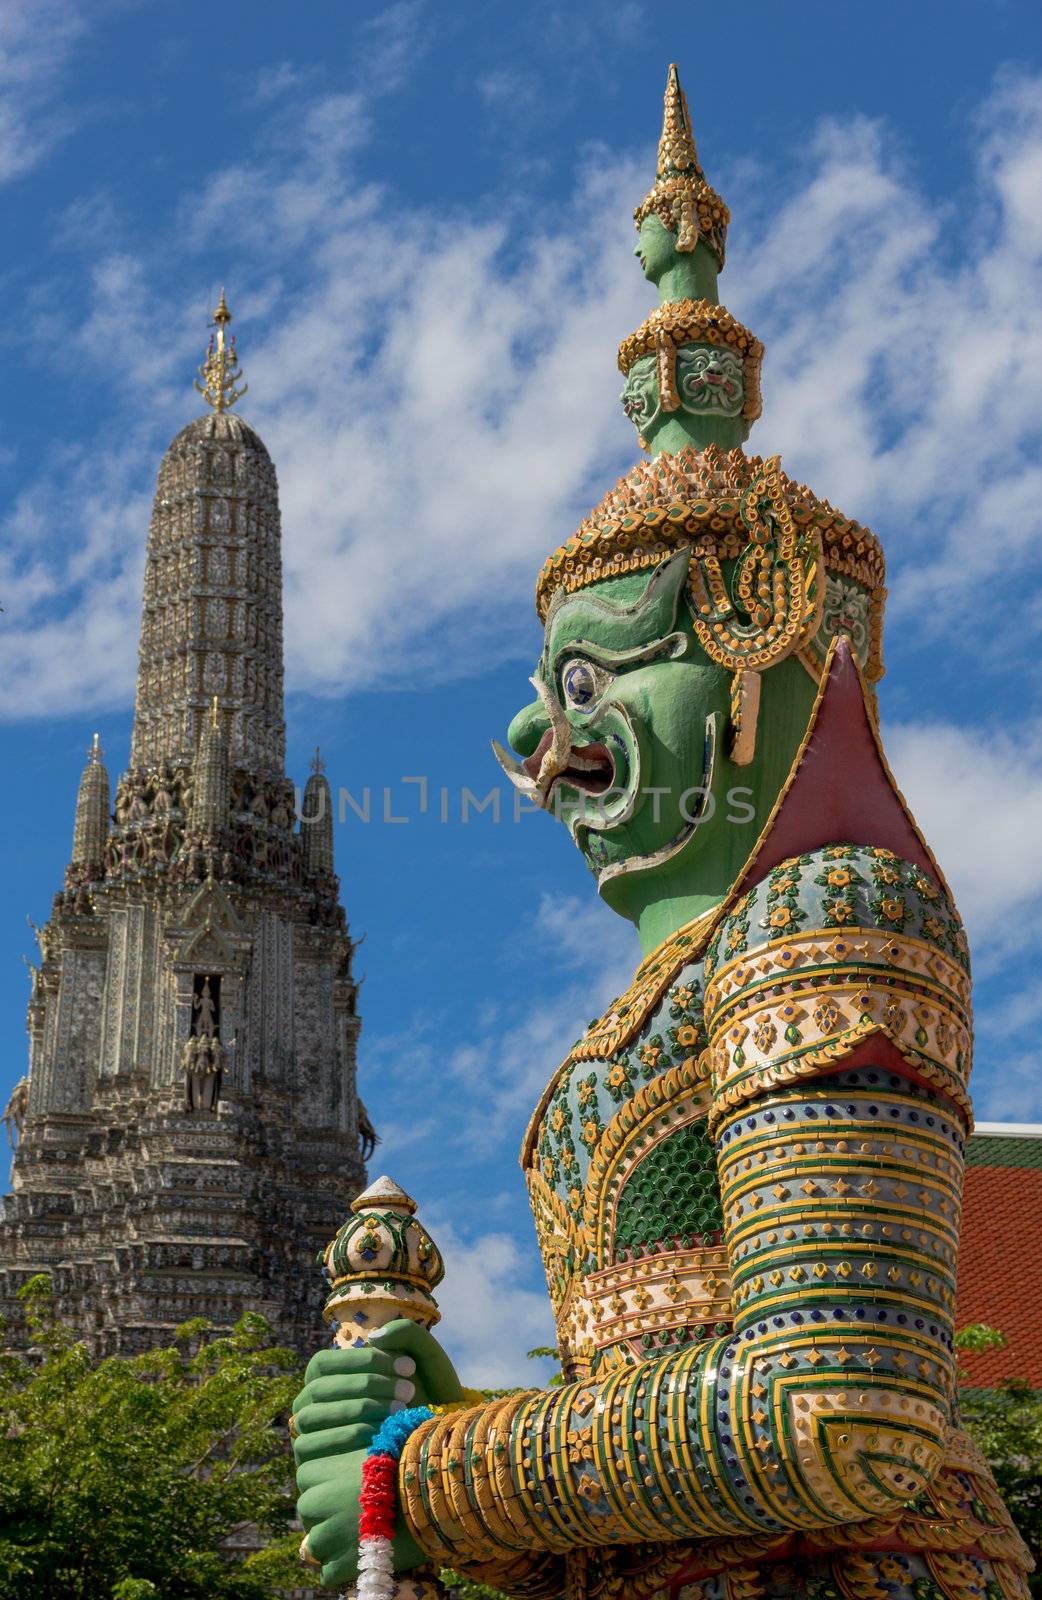 Guardian statue at the Temple of Dawn was beautifully decorated with tiny pieces of colored ceramics and Chinese porcelain placed delicately into intricate patterns. It is one of Bangkok's world-famous landmarks.